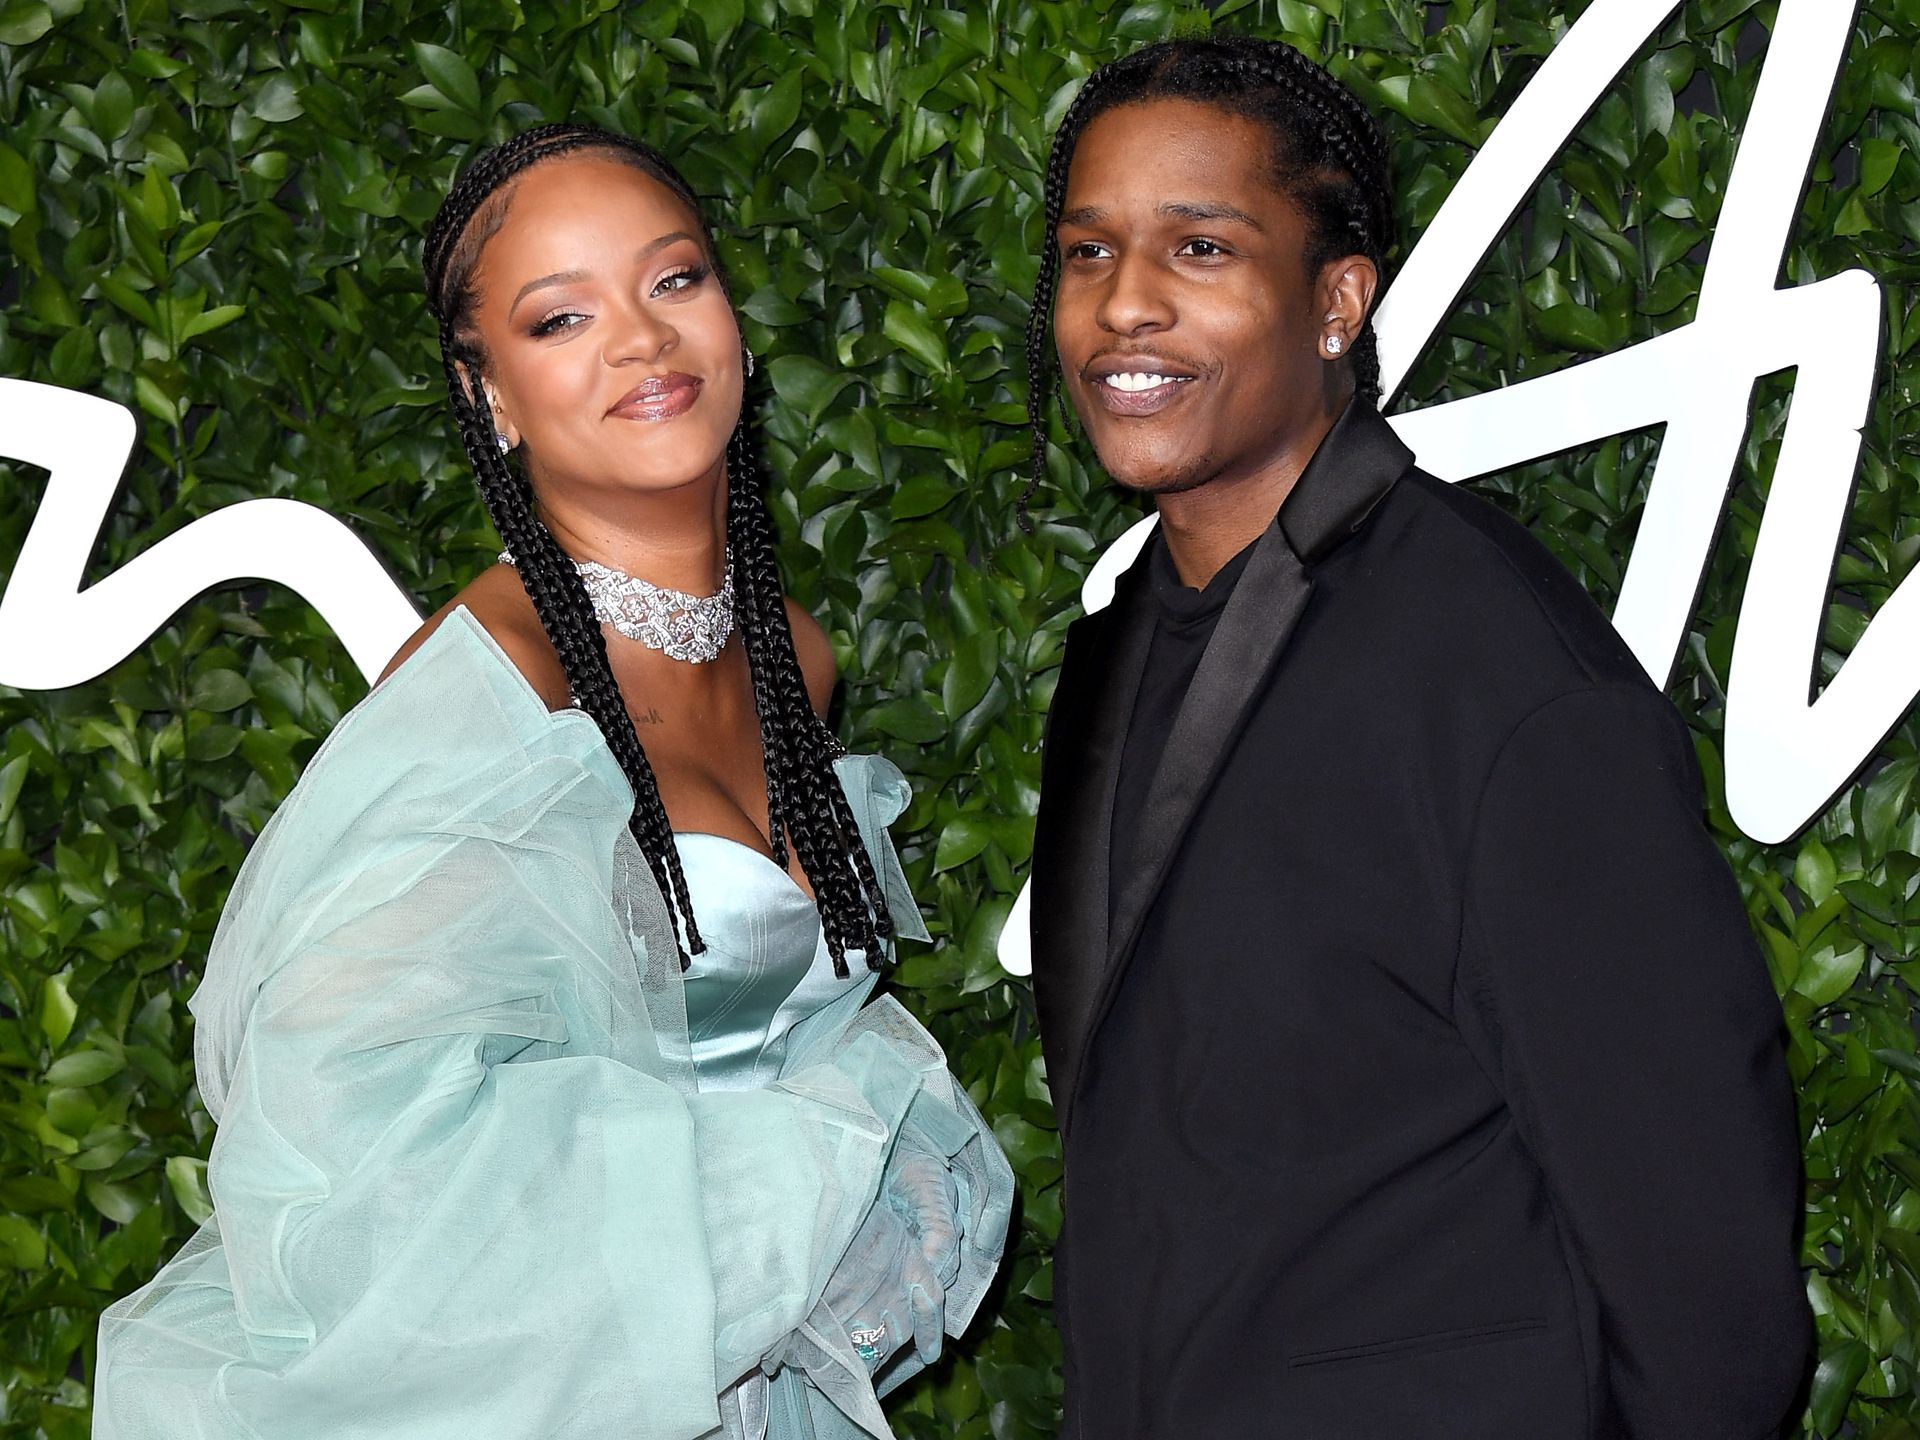 Rihanna shares glimpse of Barbados vacation featuring A$AP Rocky, son RZA